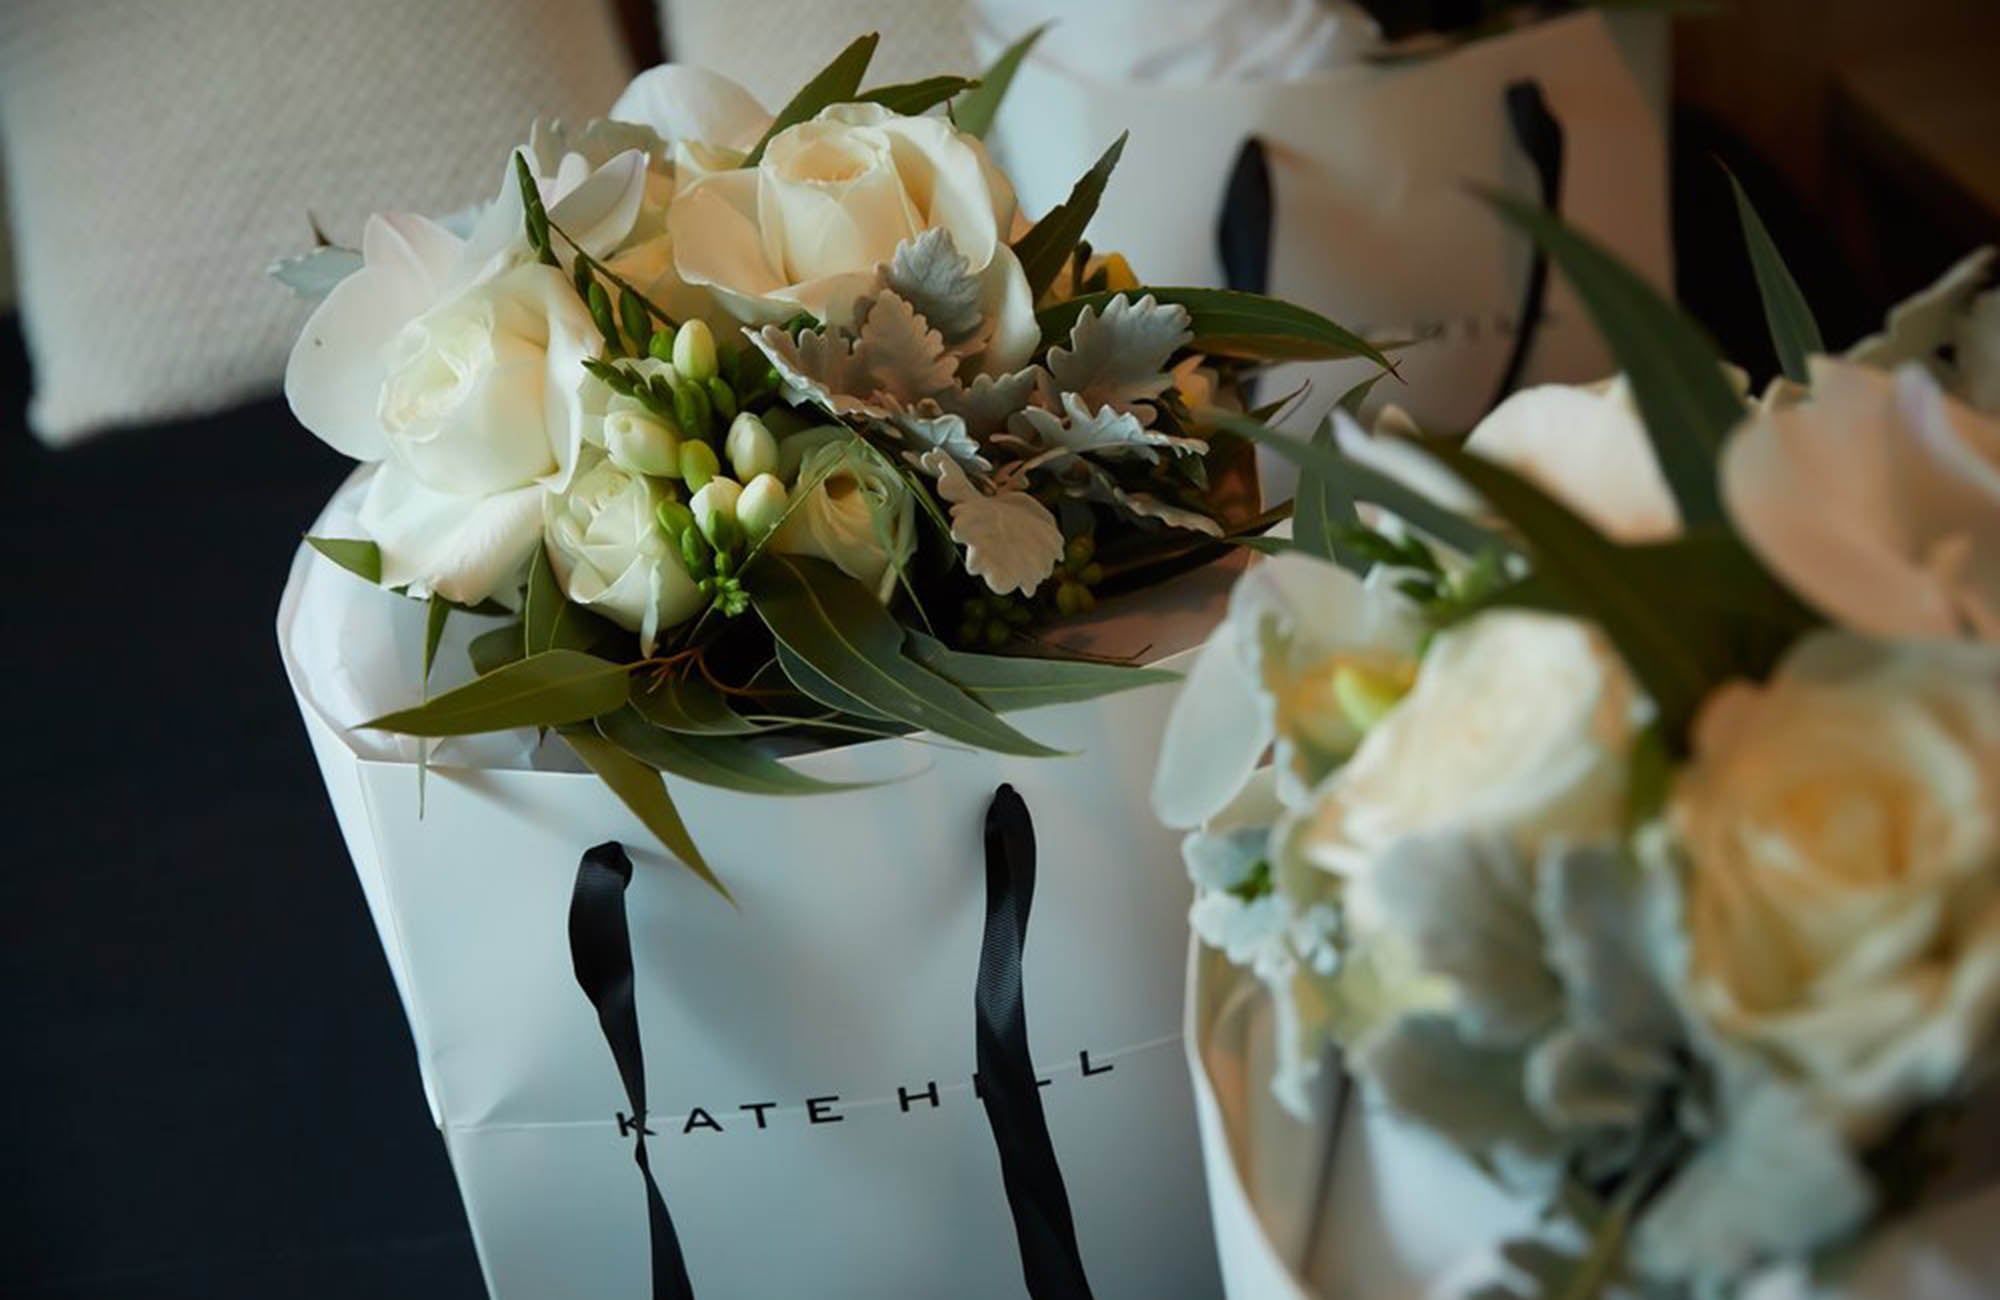 Wedding Flowers in Kate Hill Gift Bag